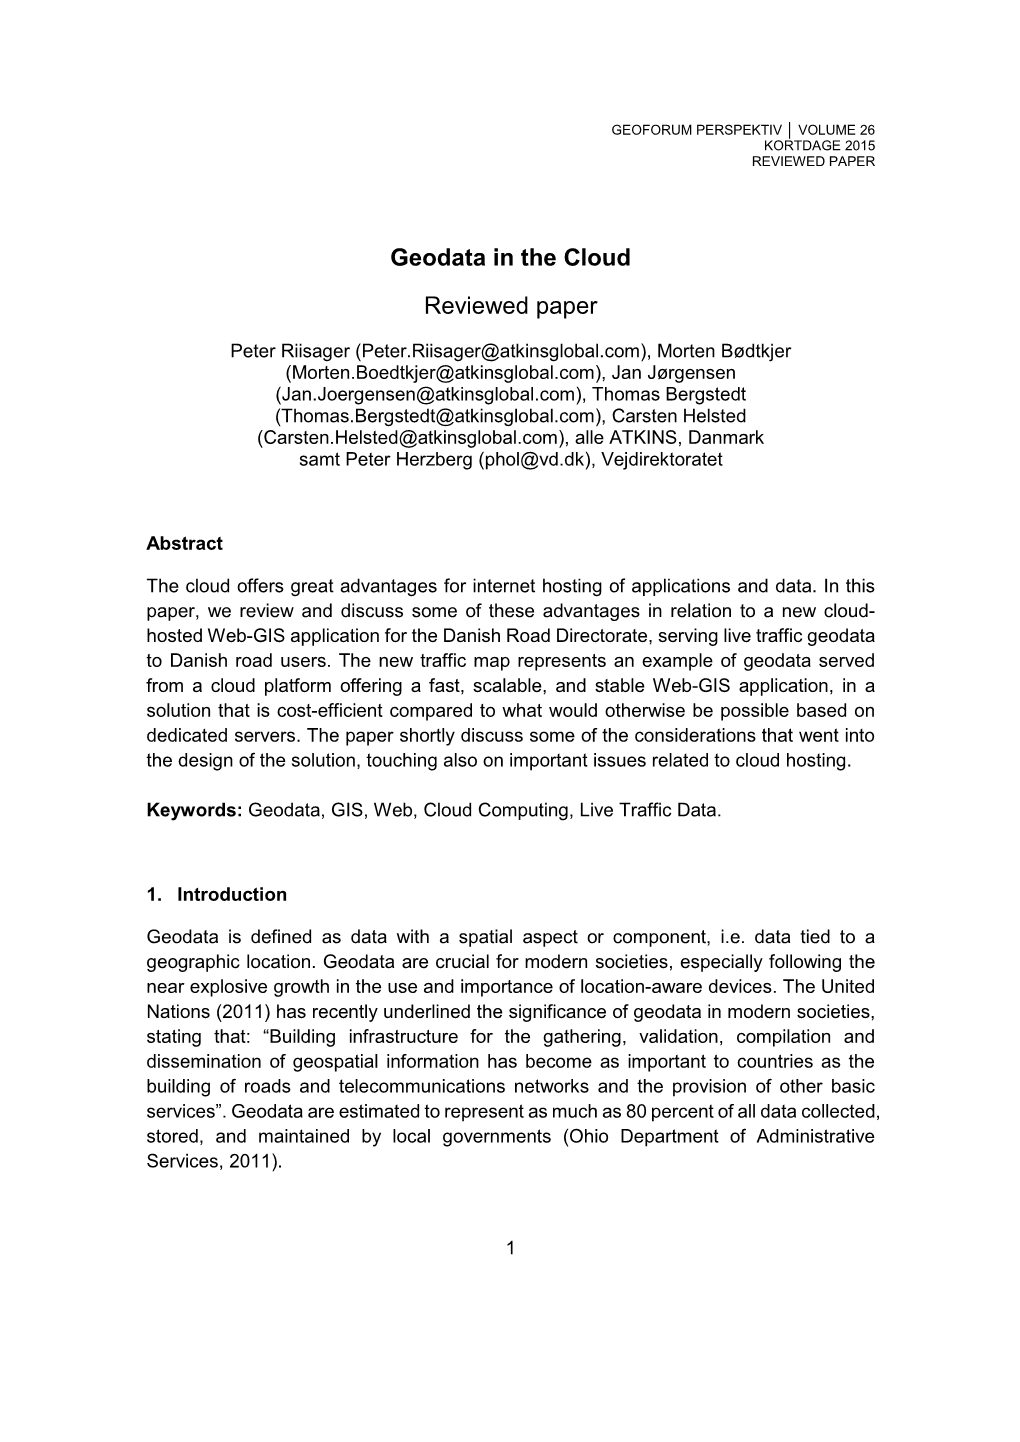 Geodata in the Cloud Reviewed Paper